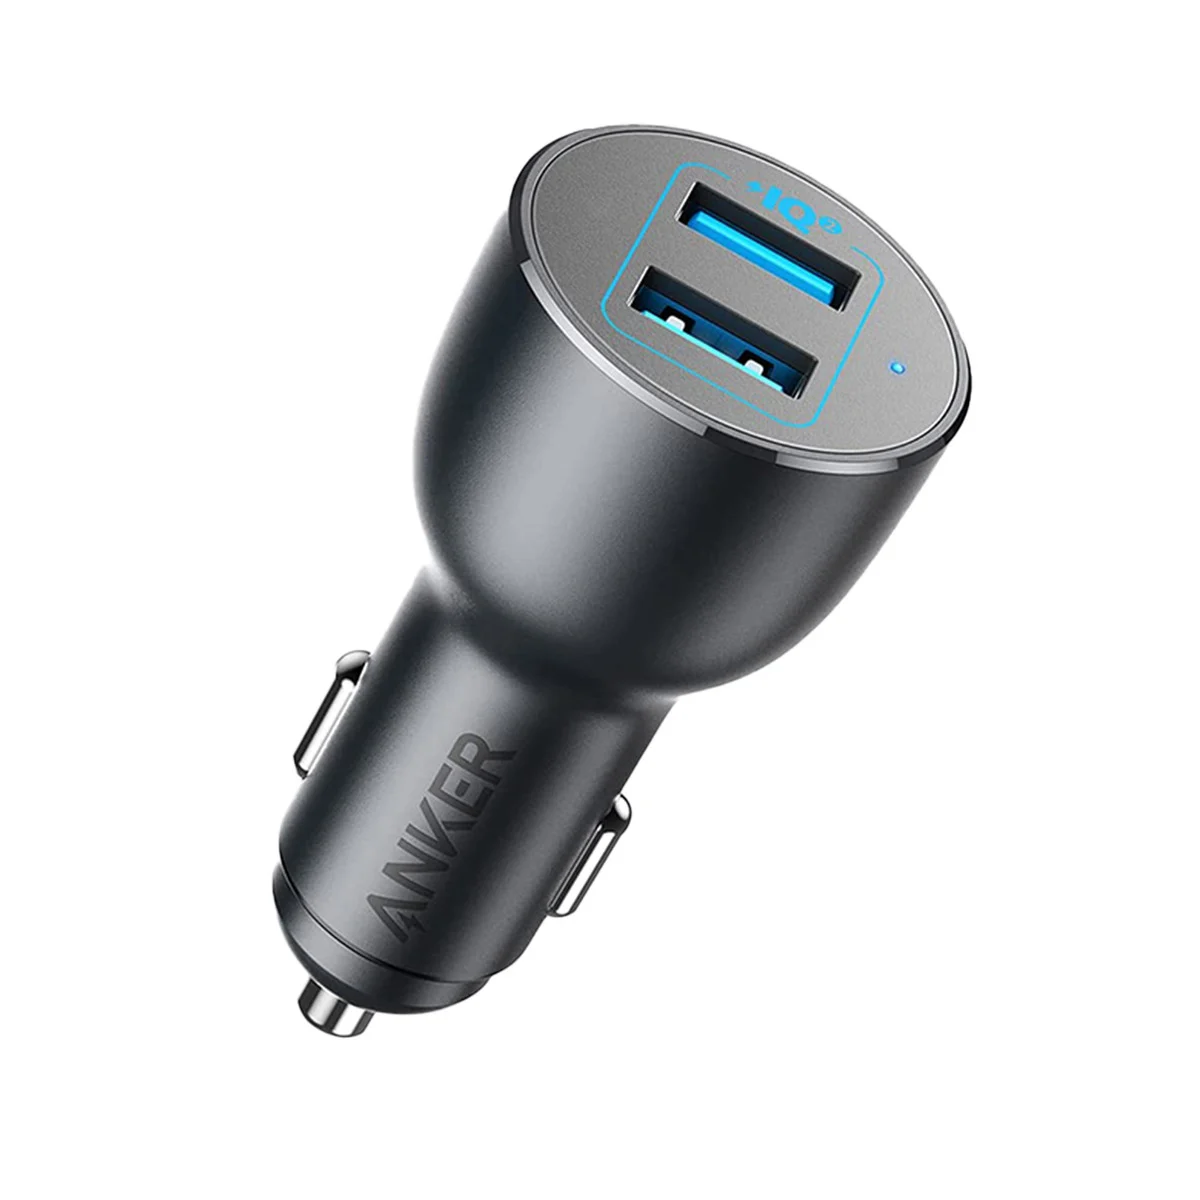 Anker PowerDrive III Car Charger A2729H11 - Black